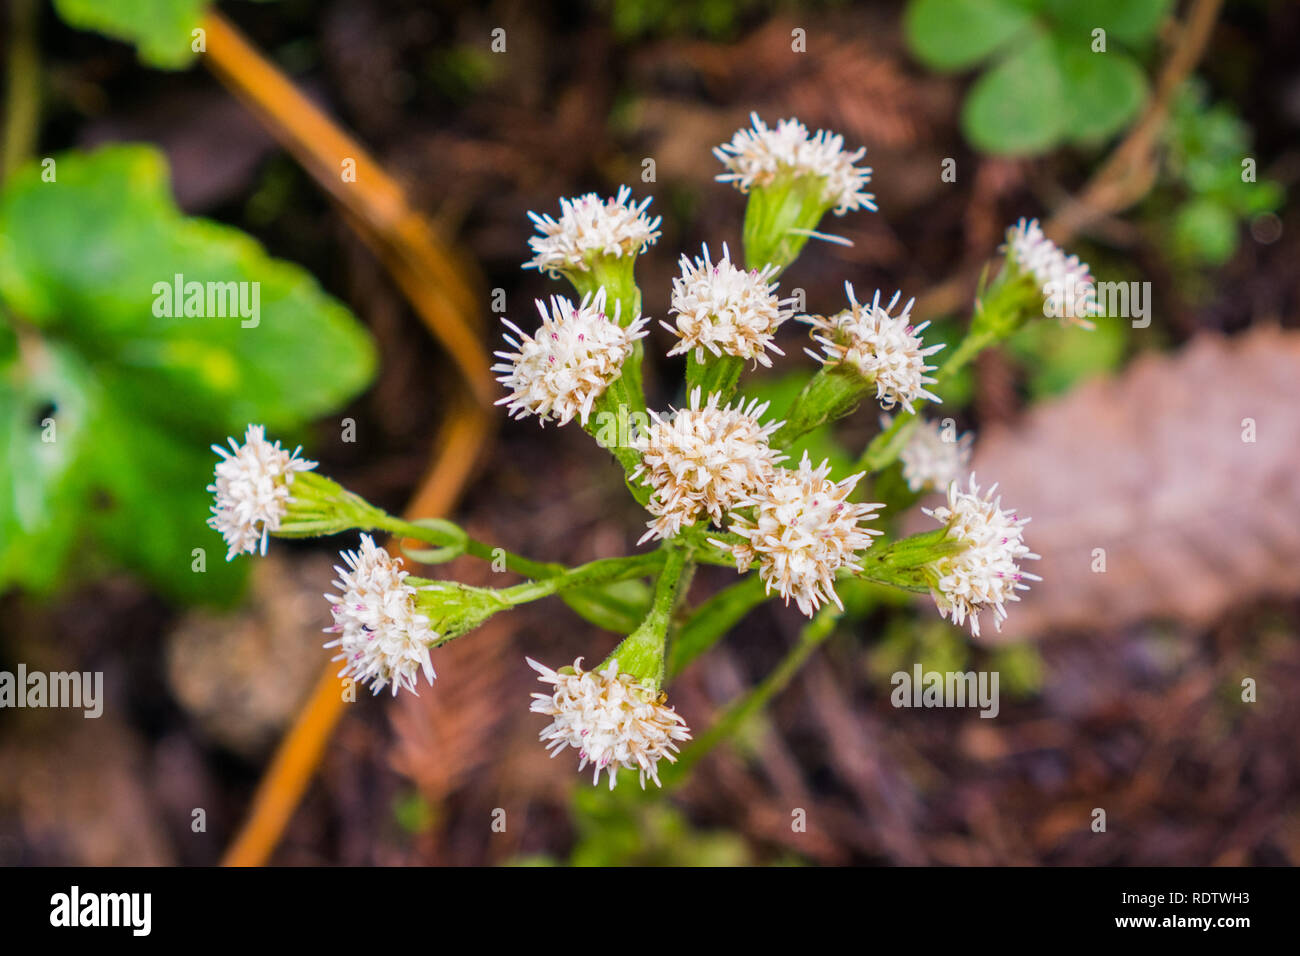 Close up of Ageratina adenophora flowers growing the the forests of Santa Cruz mountains, San Francisco bay area; this plant is considered invasive in Stock Photo